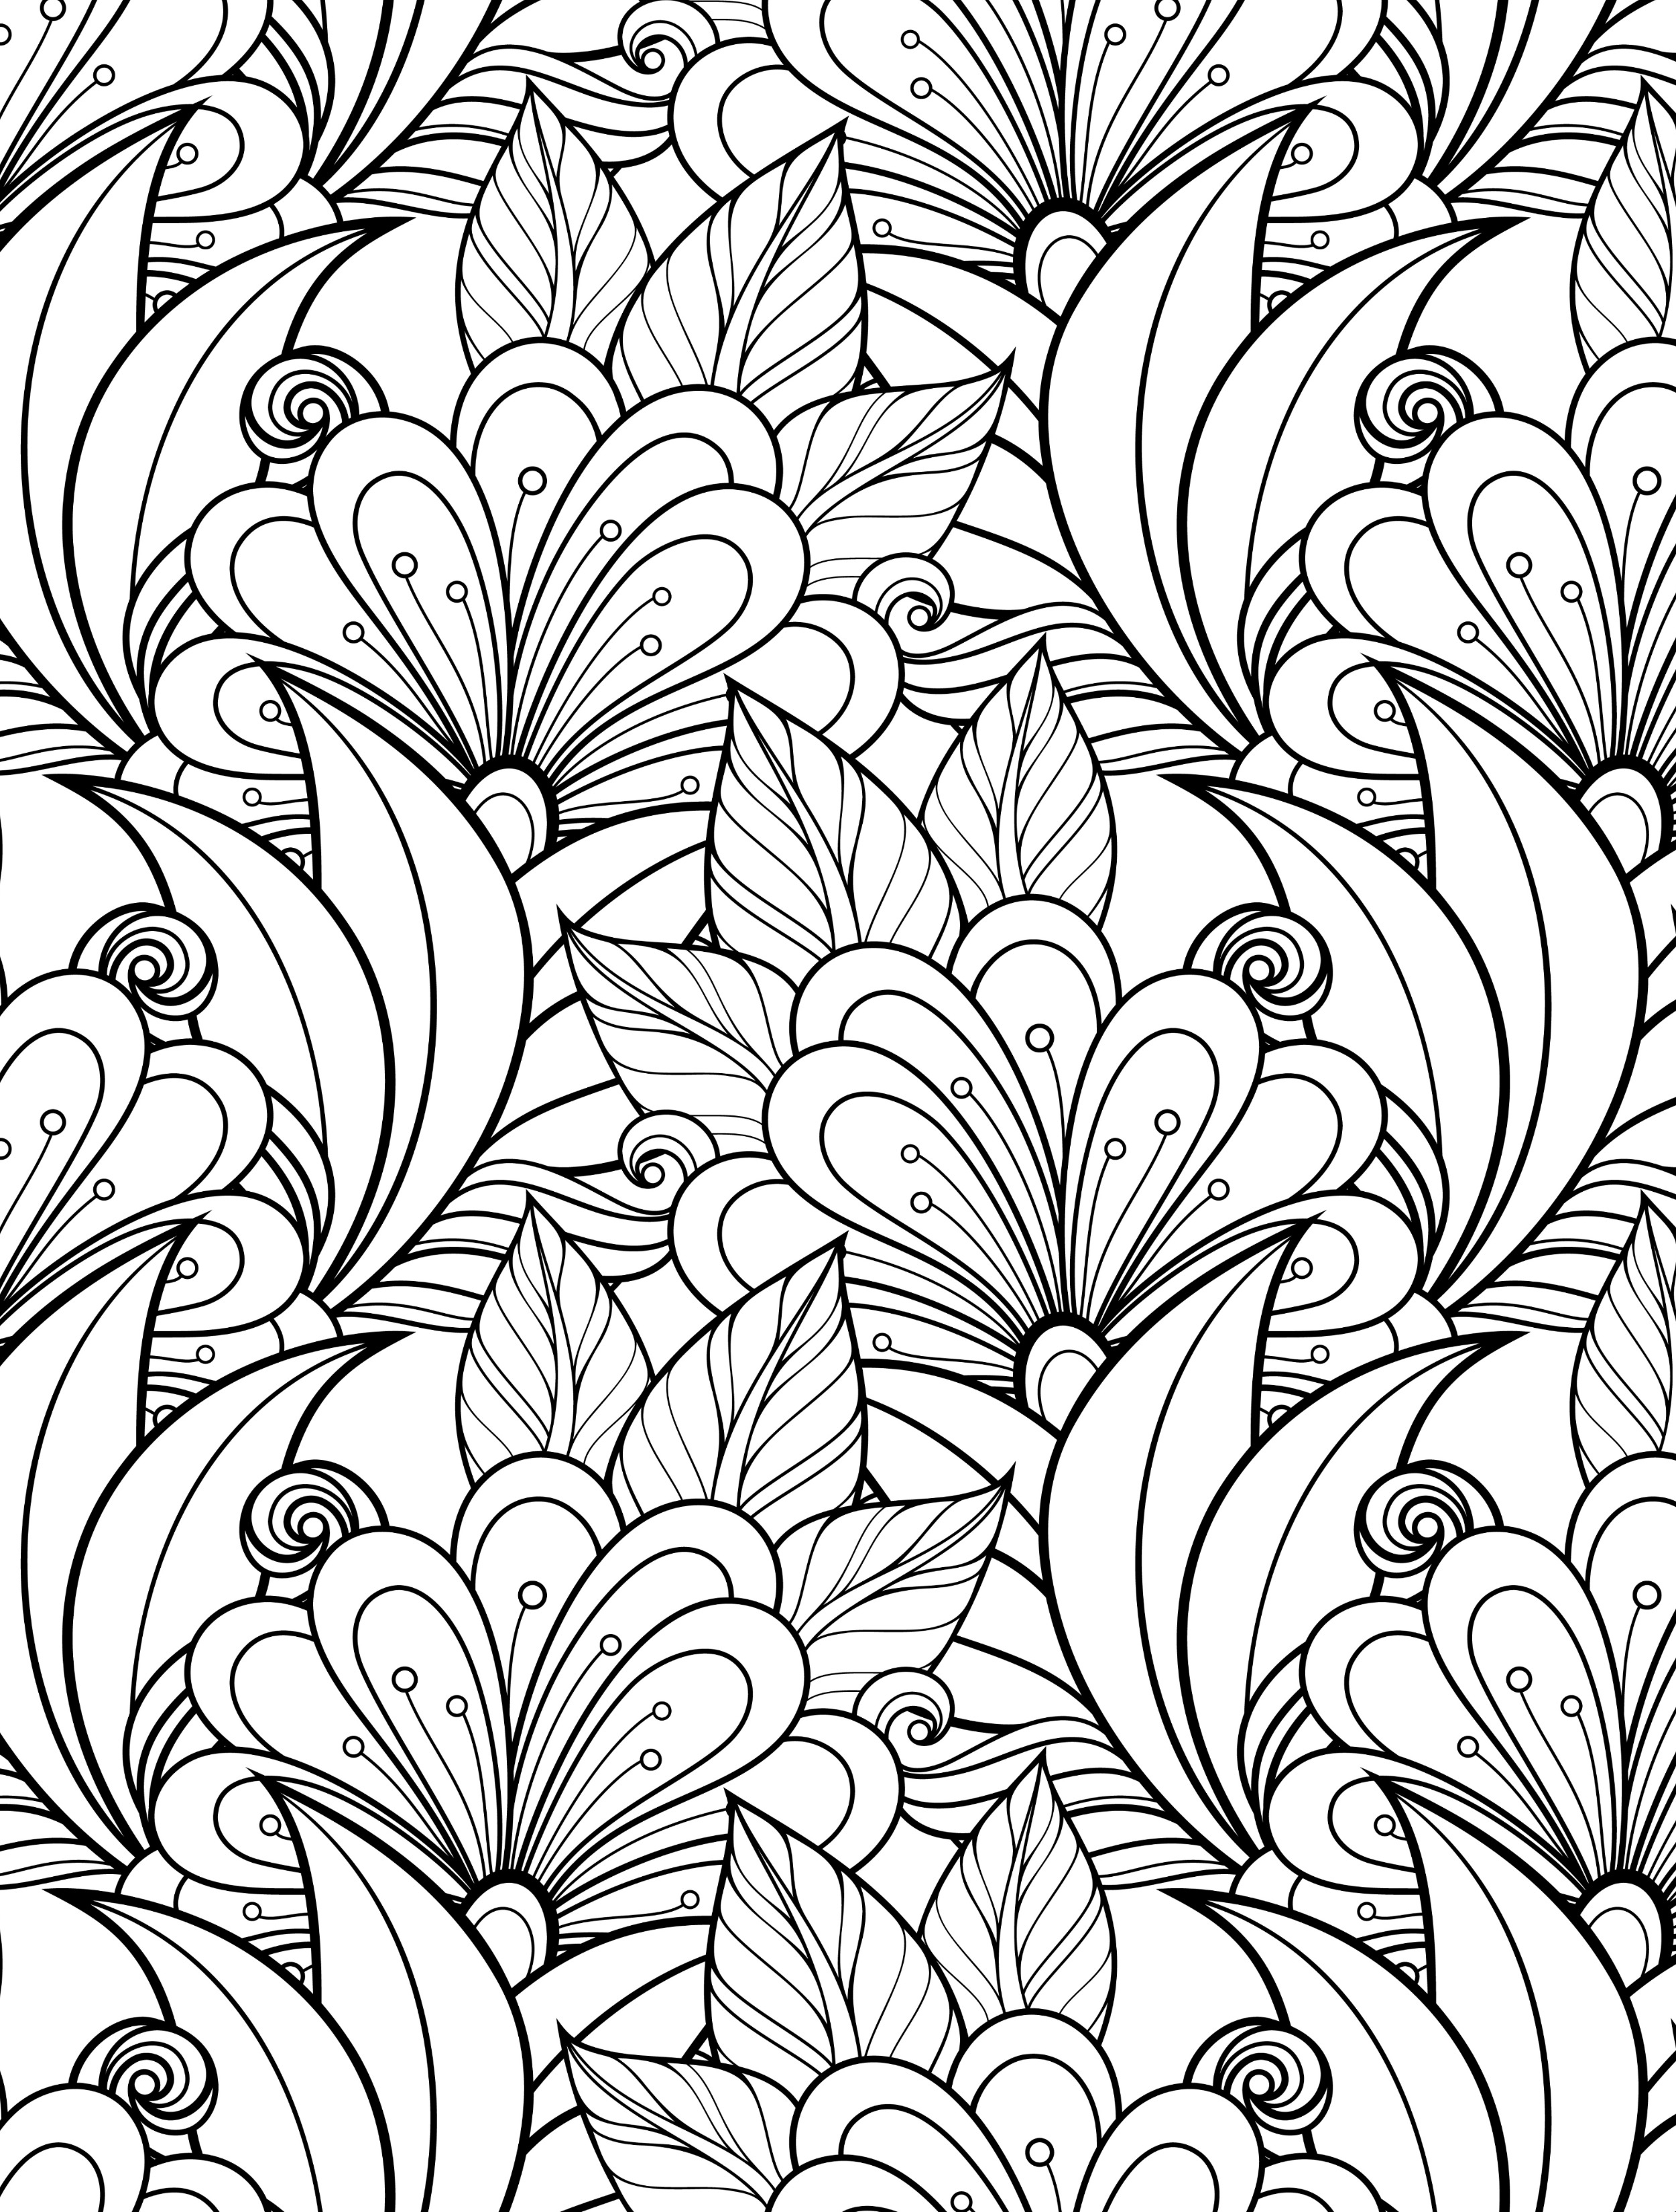 24 More Free Printable Adult Coloring Pages - Page 7 Of 25 - Nerdy Mamma - Free Printable Coloring Books For Adults